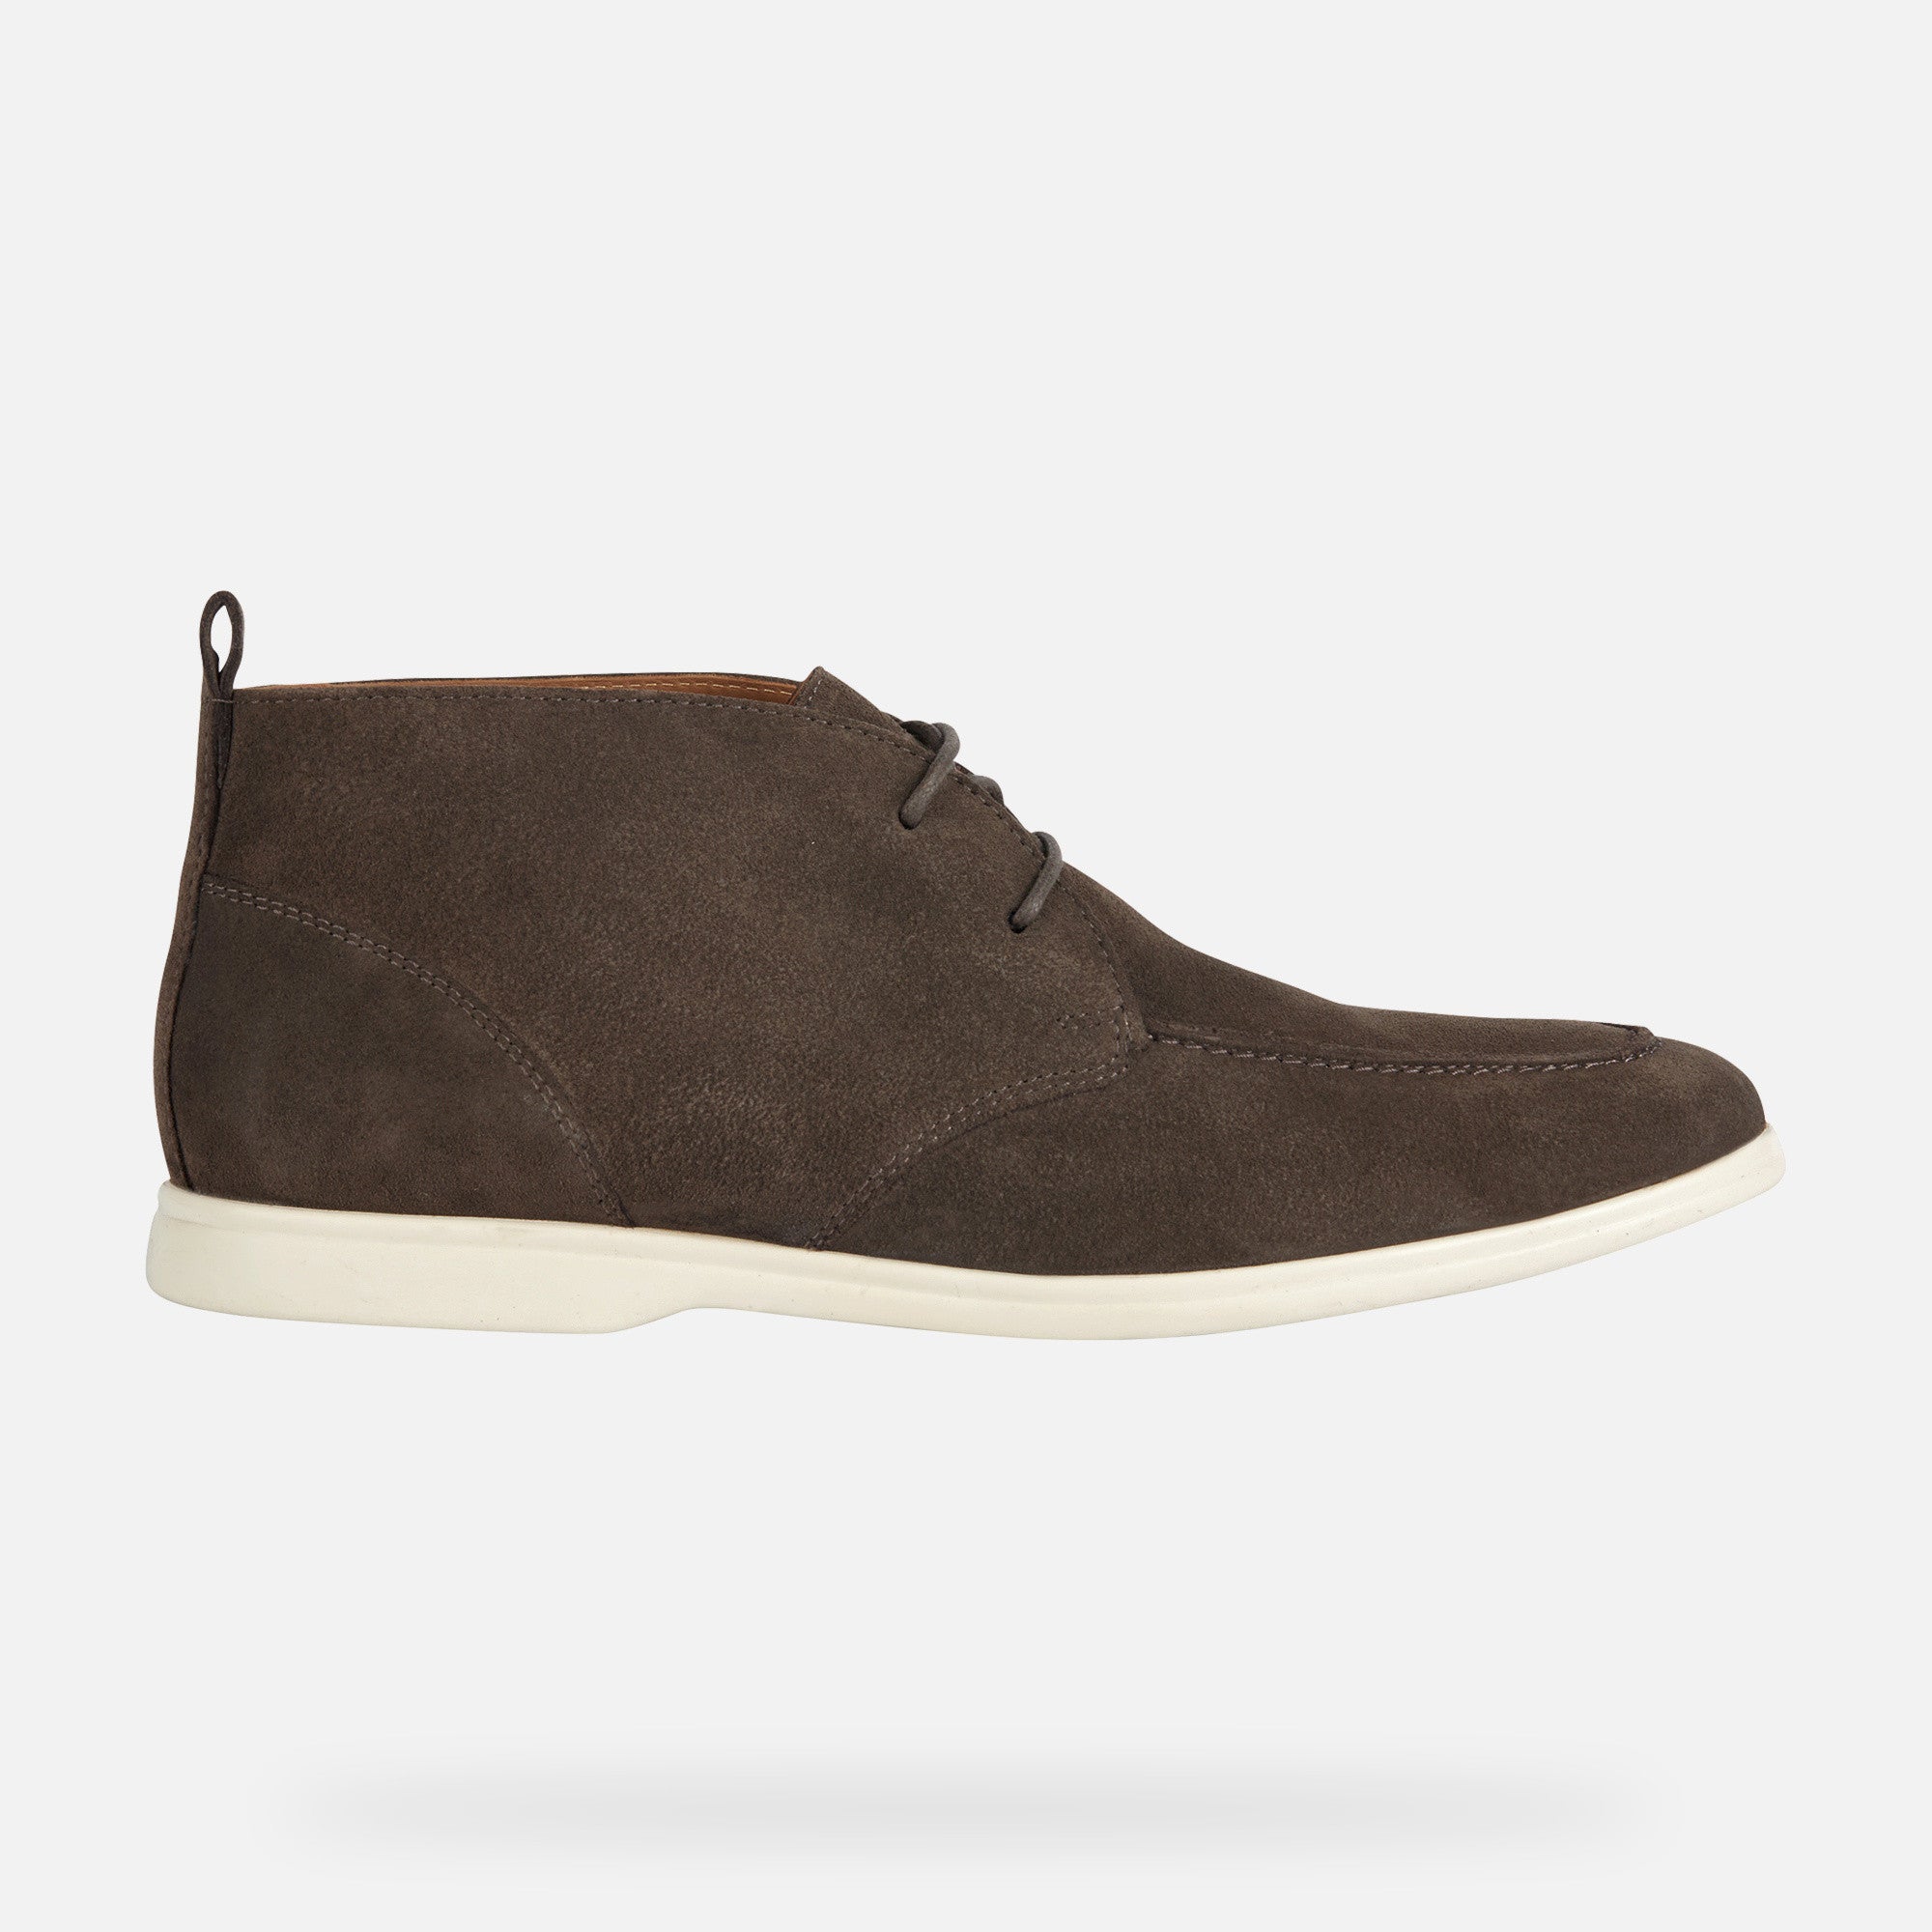 Geox Dove Grey Suede Shoes Venzone Man